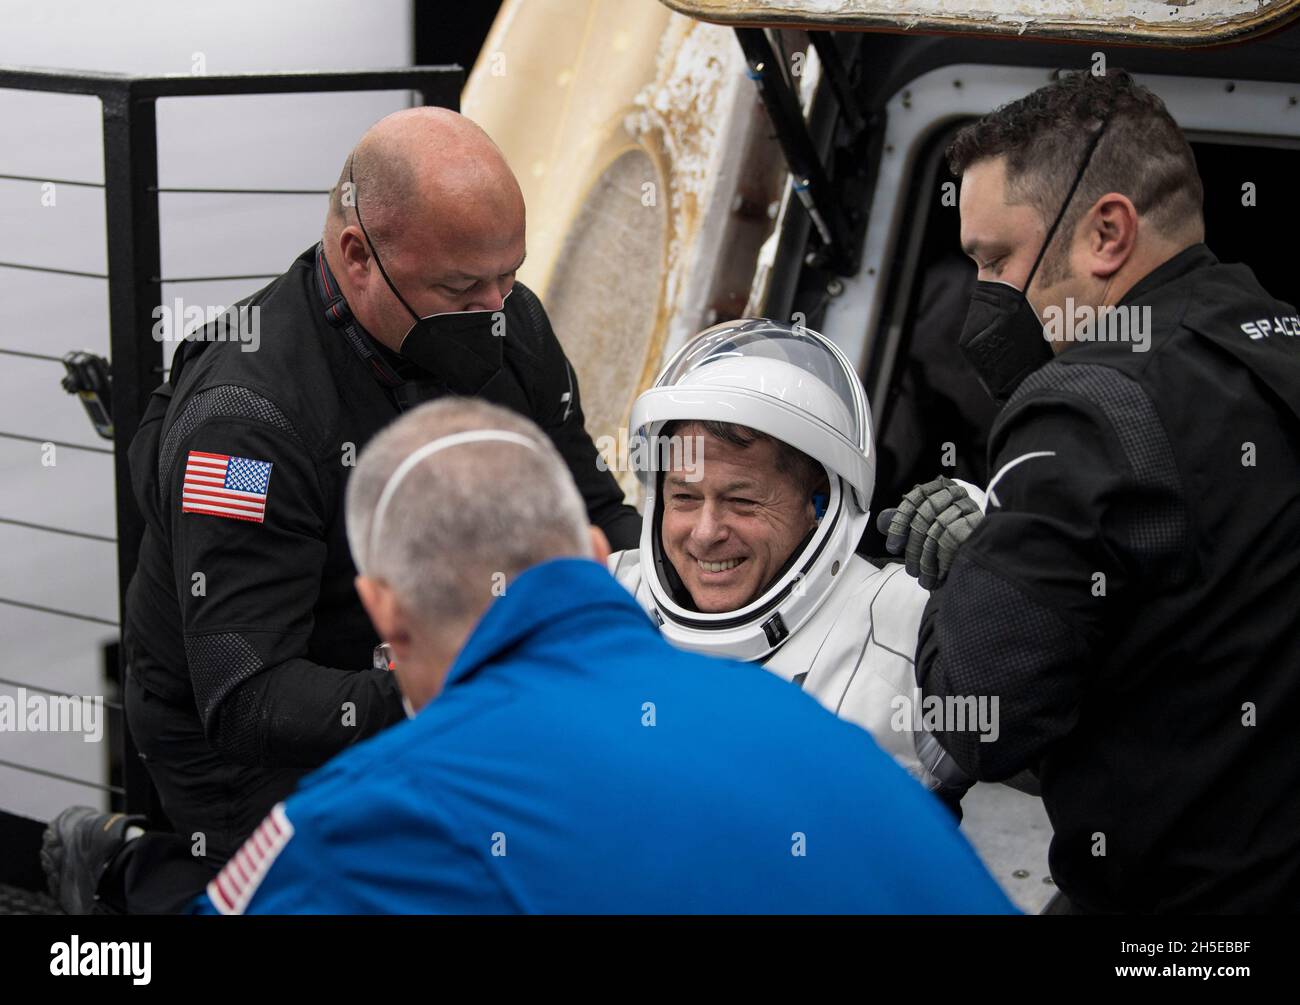 NASA astronaut Shane Kimbrough is helped out of the SpaceX Crew Dragon Endeavour spacecraft onboard the SpaceX GO Navigator recovery ship after he and NASA astronaut Megan McArthur, Japan Aerospace Exploration Agency (JAXA) astronaut Aki Hoshide, and ESA (European Space Agency) astronaut Thomas Pesquet landed in the Gulf of Mexico off the coast of Pensacola, Florida, Monday, Nov. 8, 2021. NASA’s SpaceX Crew-2 mission is the second operational mission of the SpaceX Crew Dragon spacecraft and Falcon 9 rocket to the International Space Station as part of the agency’s Commercial Crew Program. Phot Stock Photo